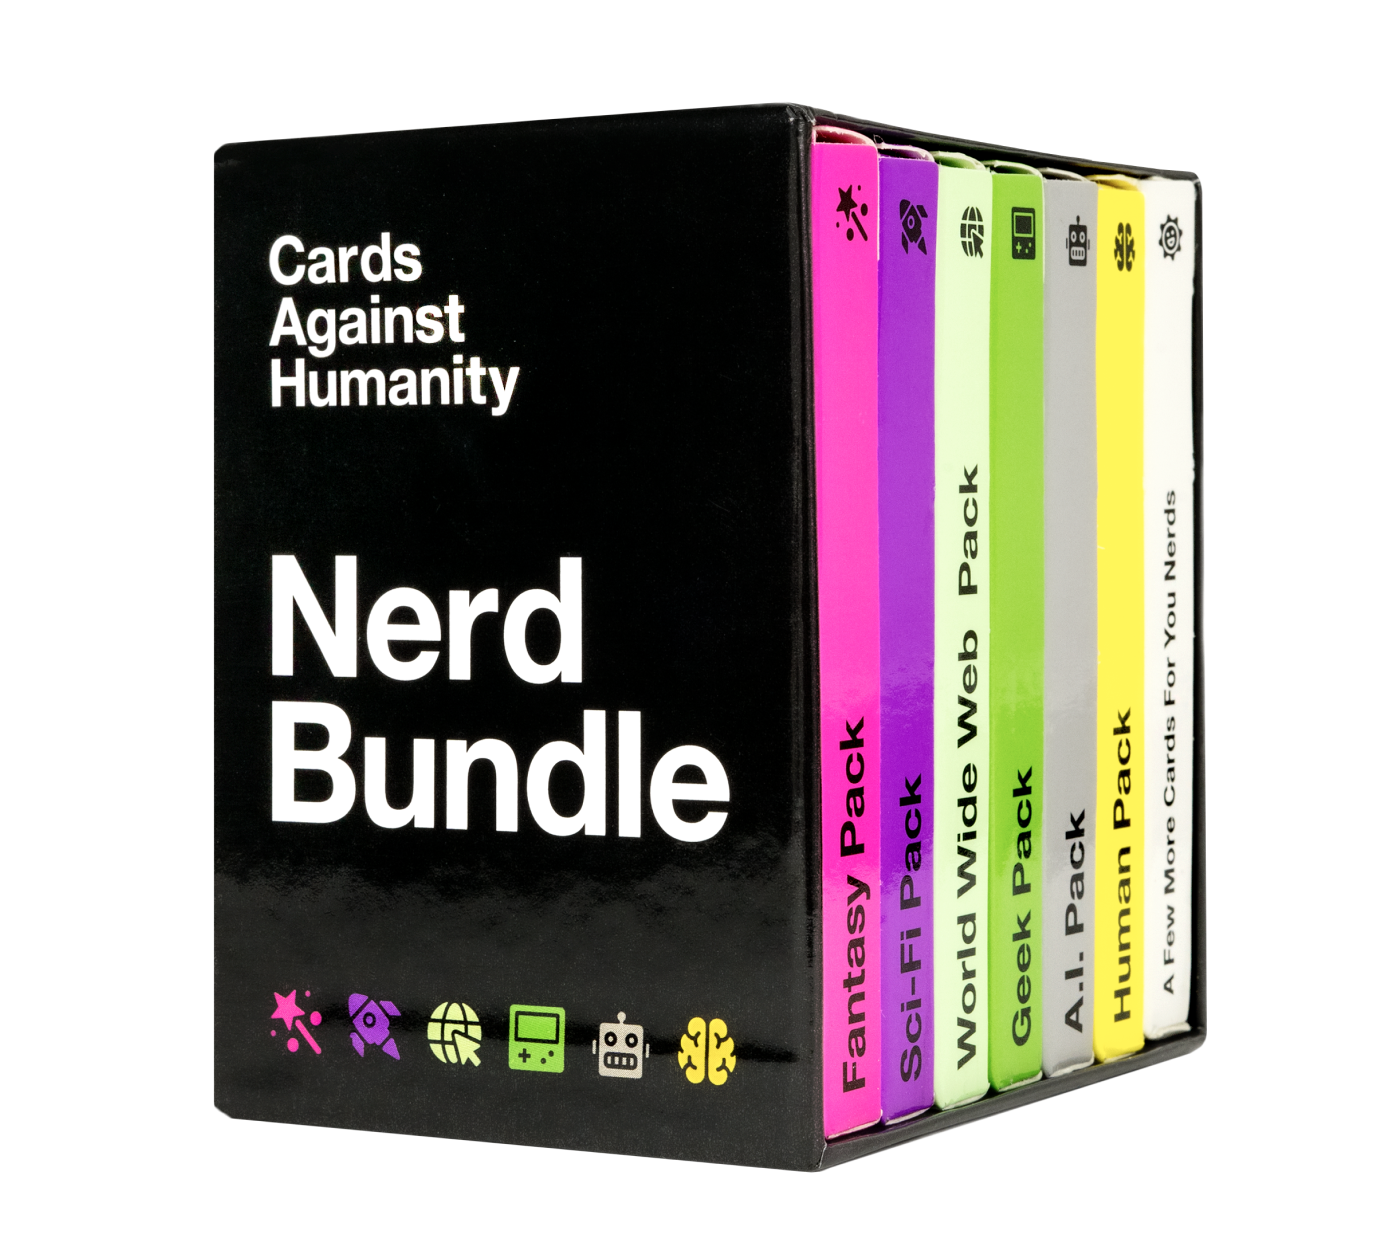 Expansion Pack NEW Internet Pack World Wide Web Pack Cards Against Humanity Cards Against Humanity 